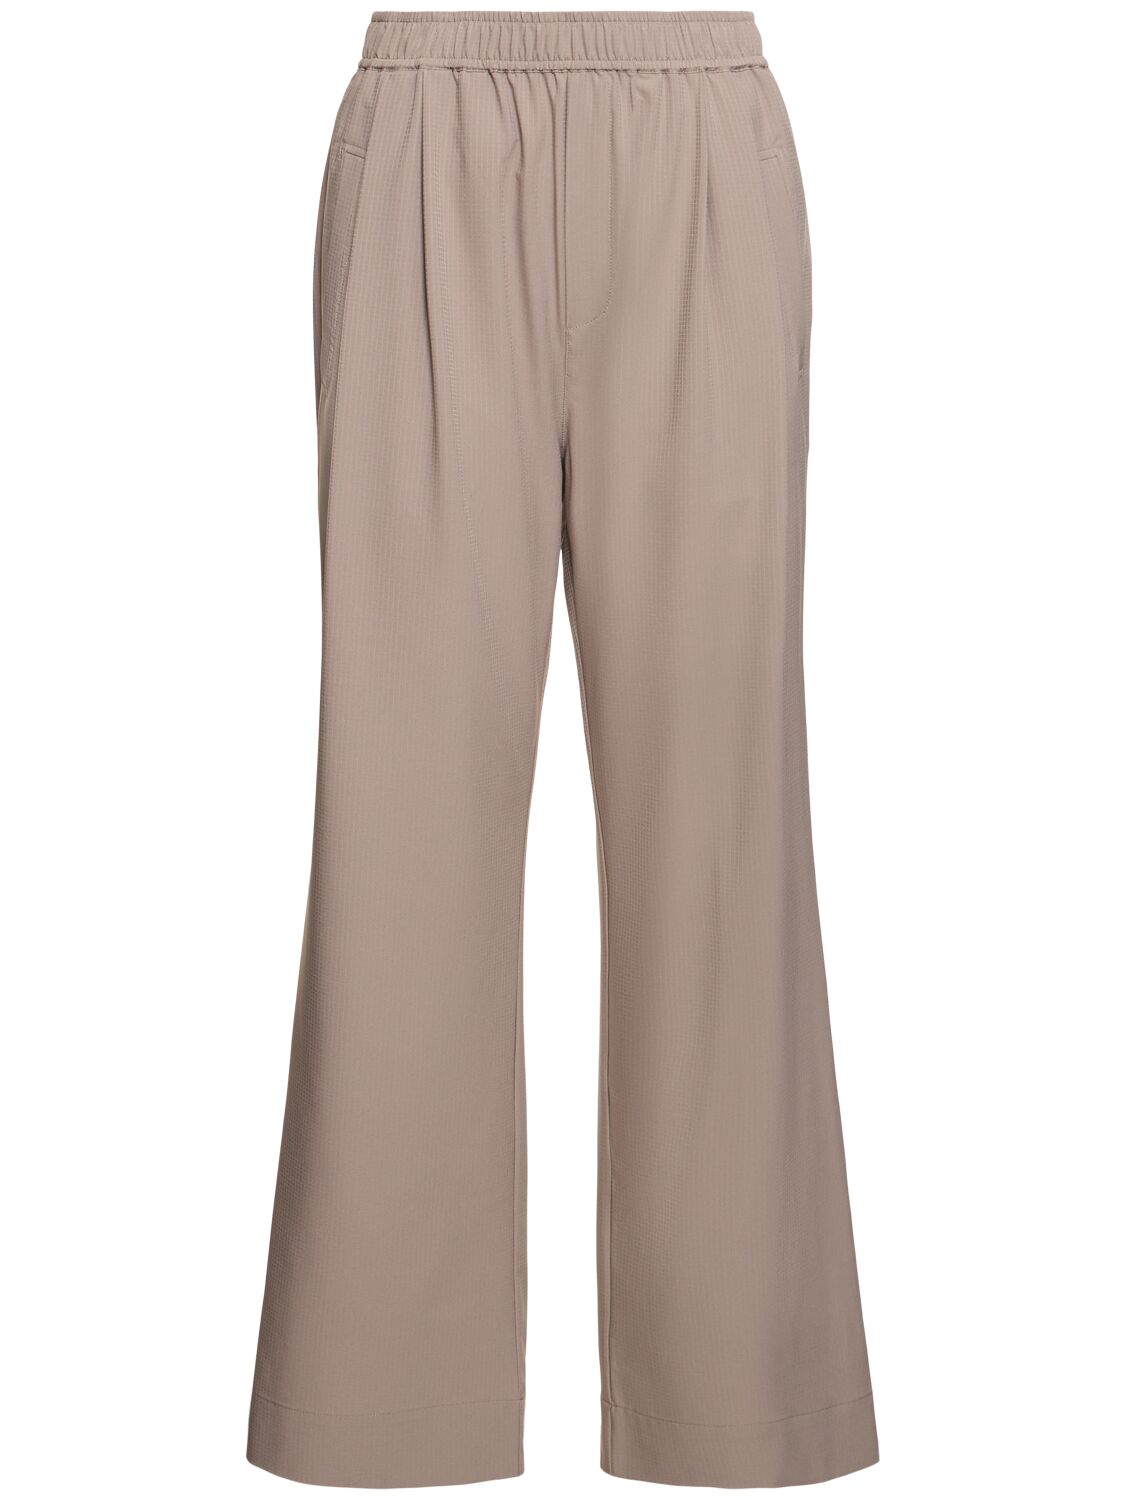 Tacome Pleated Straight Pants